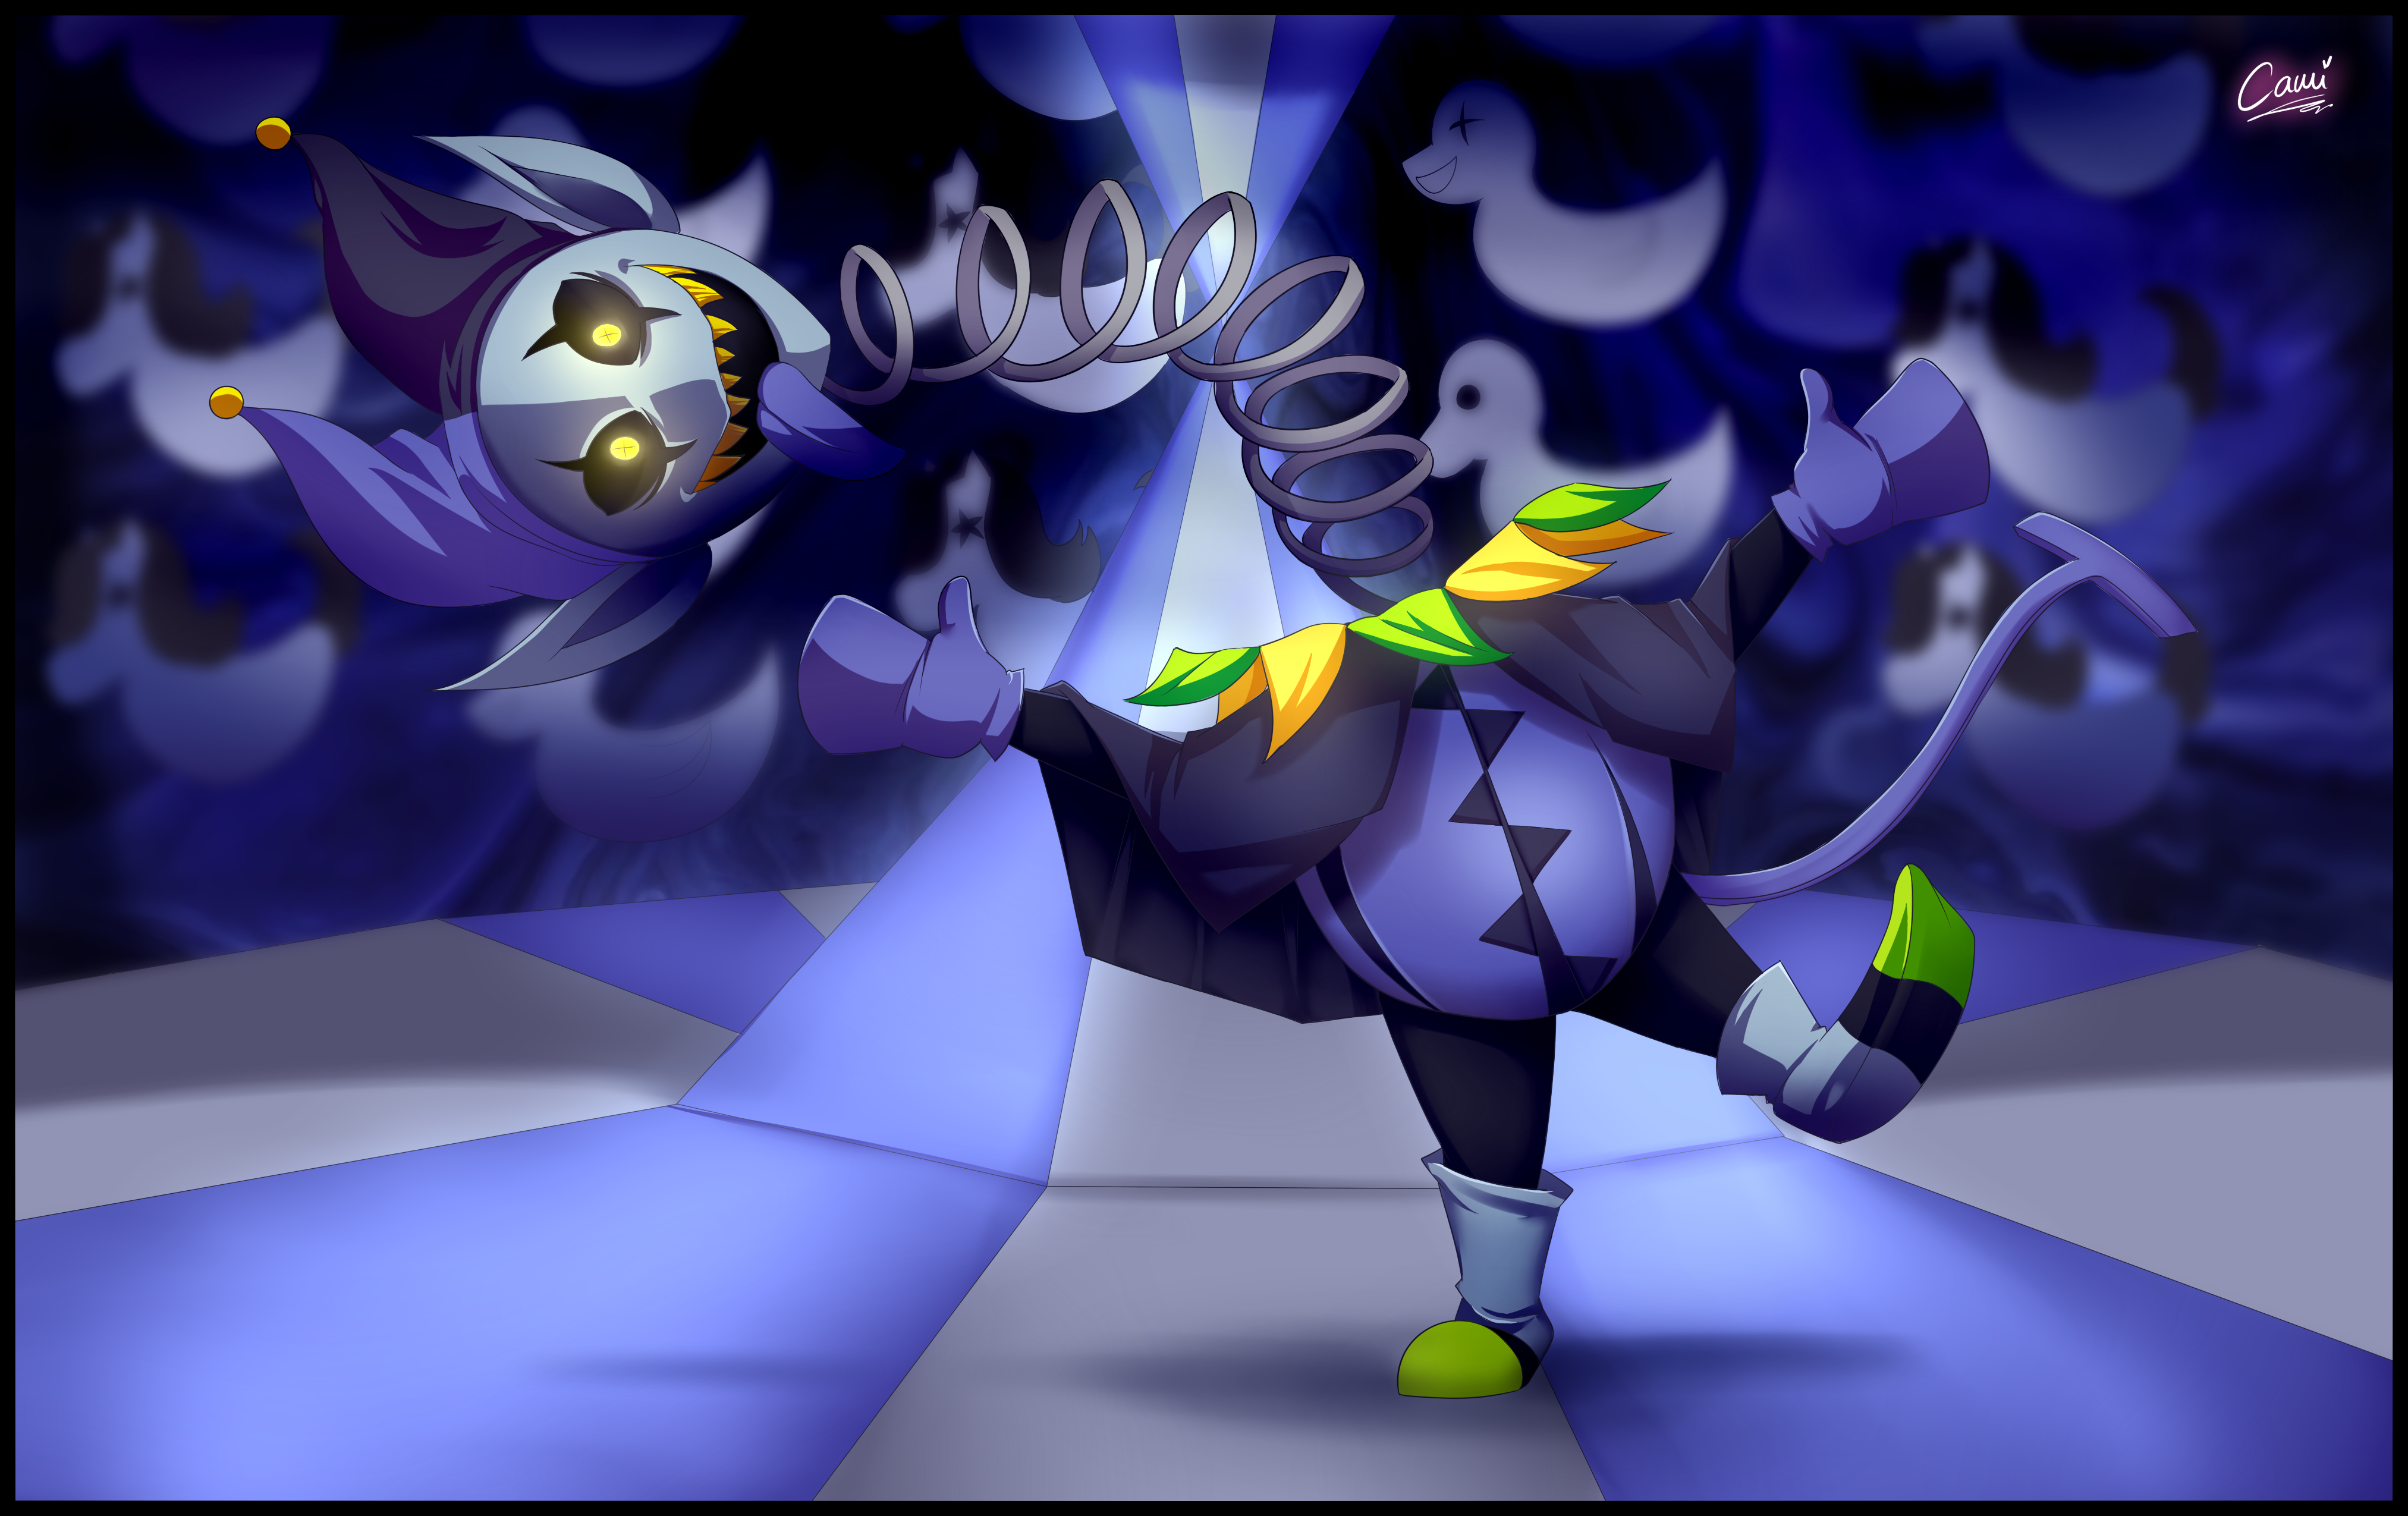 chaos___c_h_a_o_s____jevil_from_deltarune_by_camilaanims_dcrru03.png